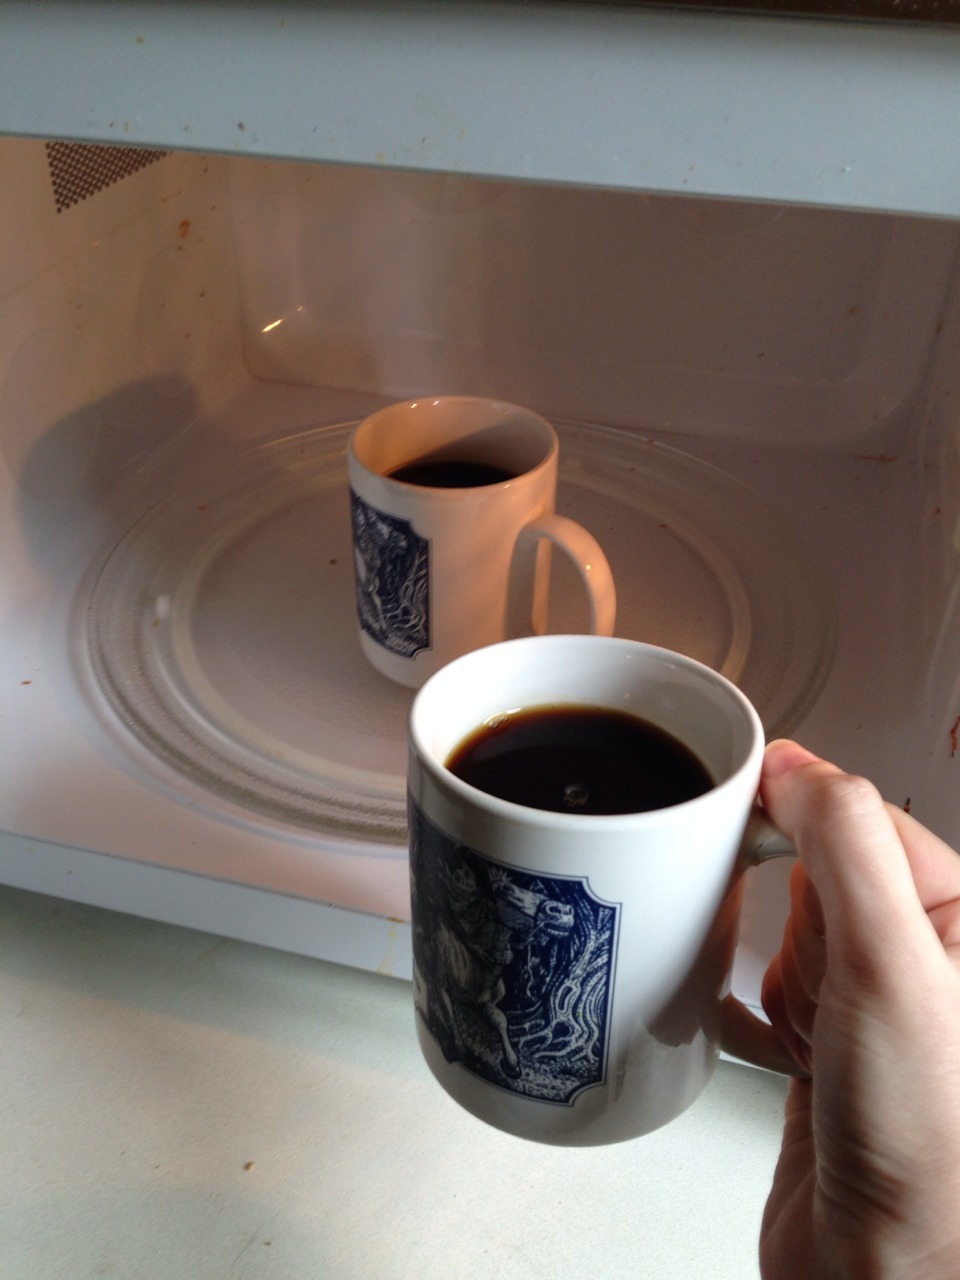 jokinglyartistic: So I went to go get some coffee but it was cold so I had to heat it up and when I opened the microwave I saw this. This is like some Twilight Zone shit. 2 Things you never warm up, never!Love and Coffee 